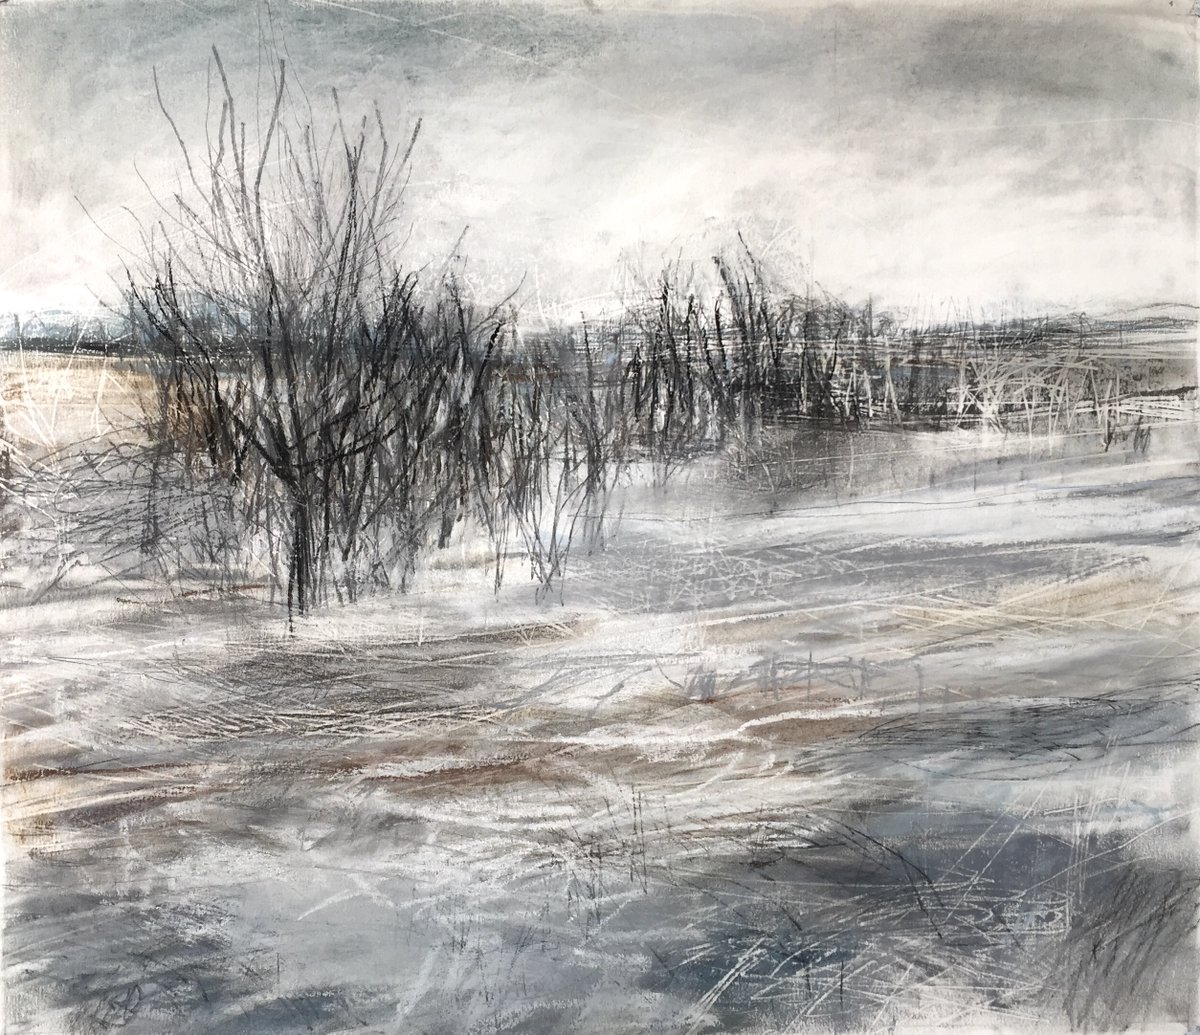 'It is written that snow is white' show @birch_gallery #Edinburgh ends 21st Dec. 24 invited artists respond to a poem by #Lithuanian émigré poet #AntanasŠkema, full of metaphors about the meaning of life. 'Ephemeral II', #pastel, #charcoal, #graphite birchtreegallery.co.uk/exhibitions/ #snow